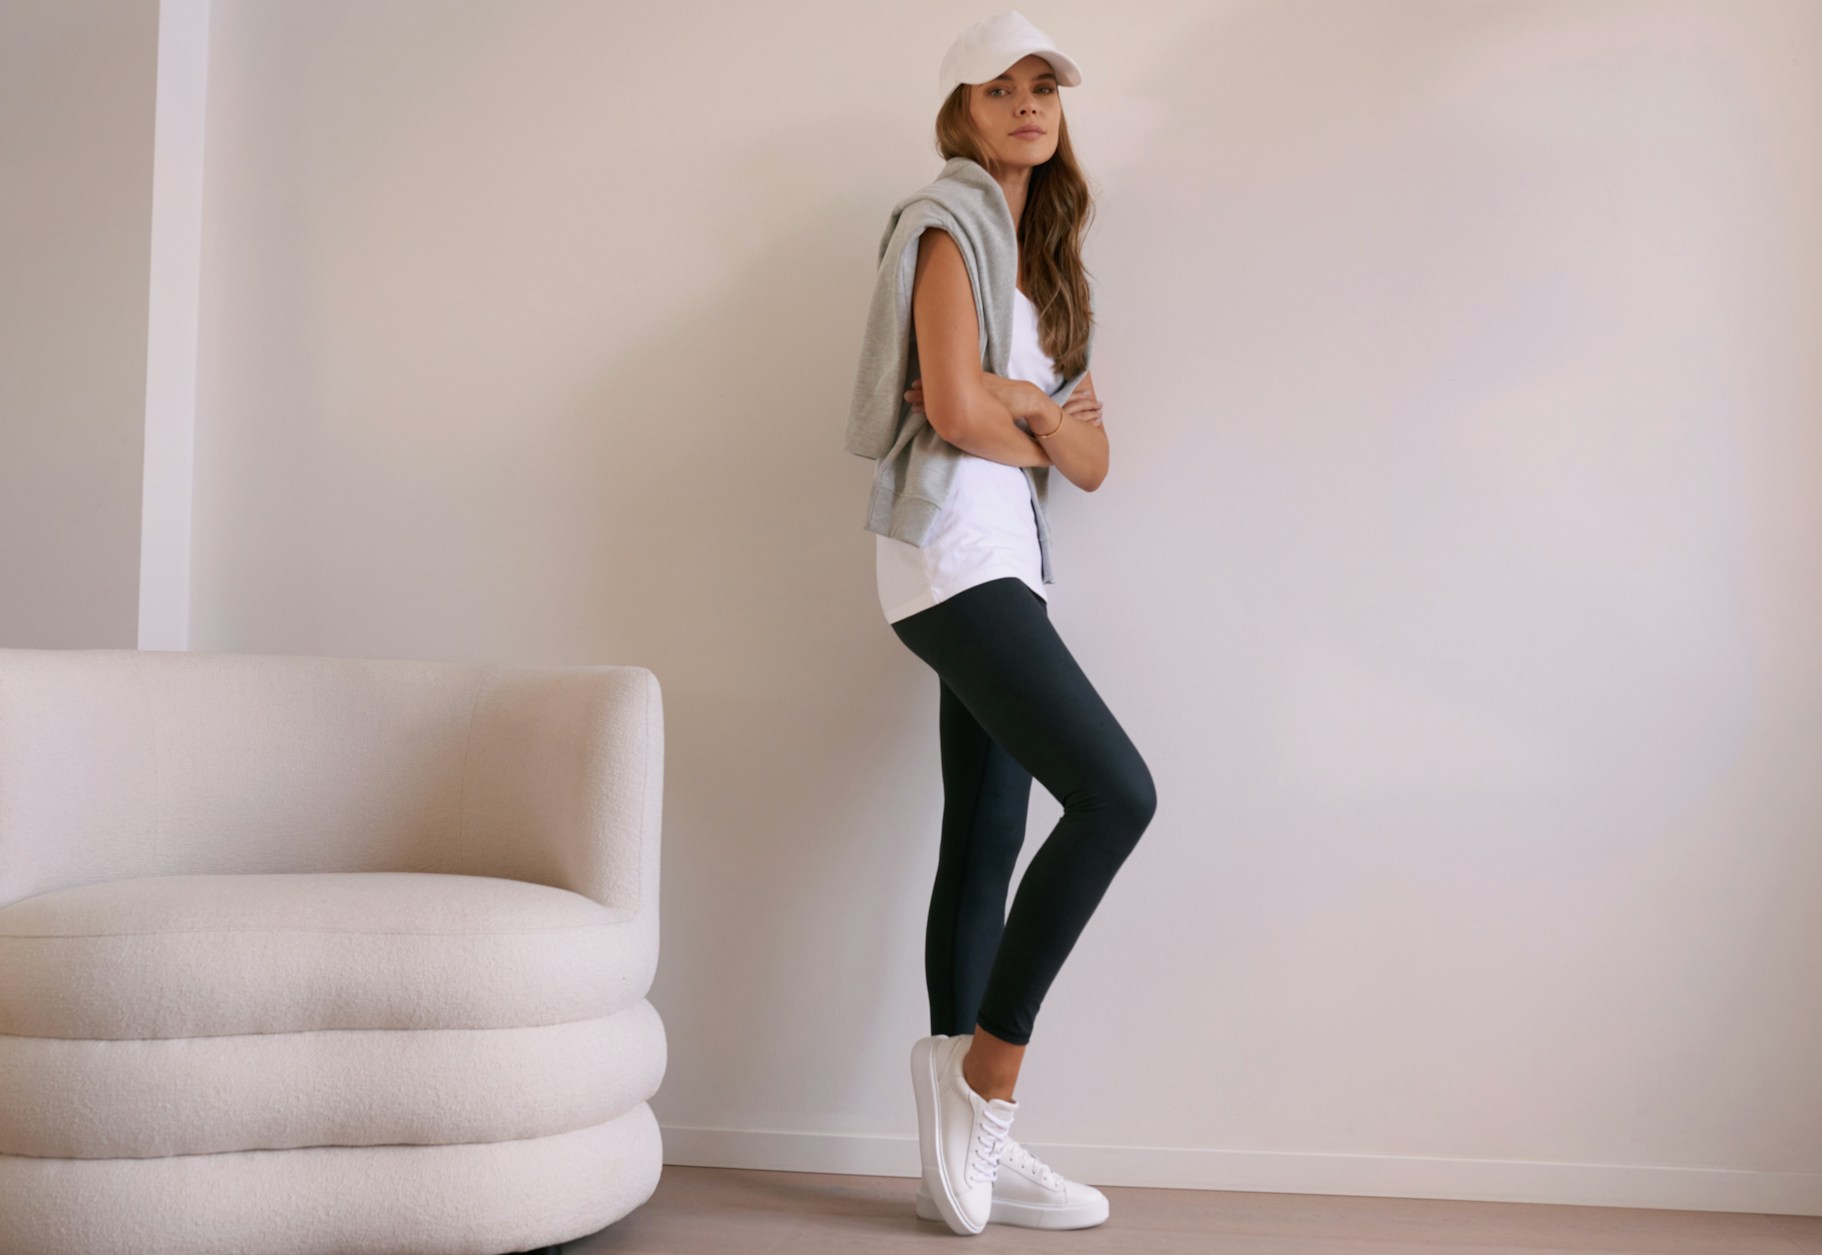 SHOP ATHLEISURE GIFTS